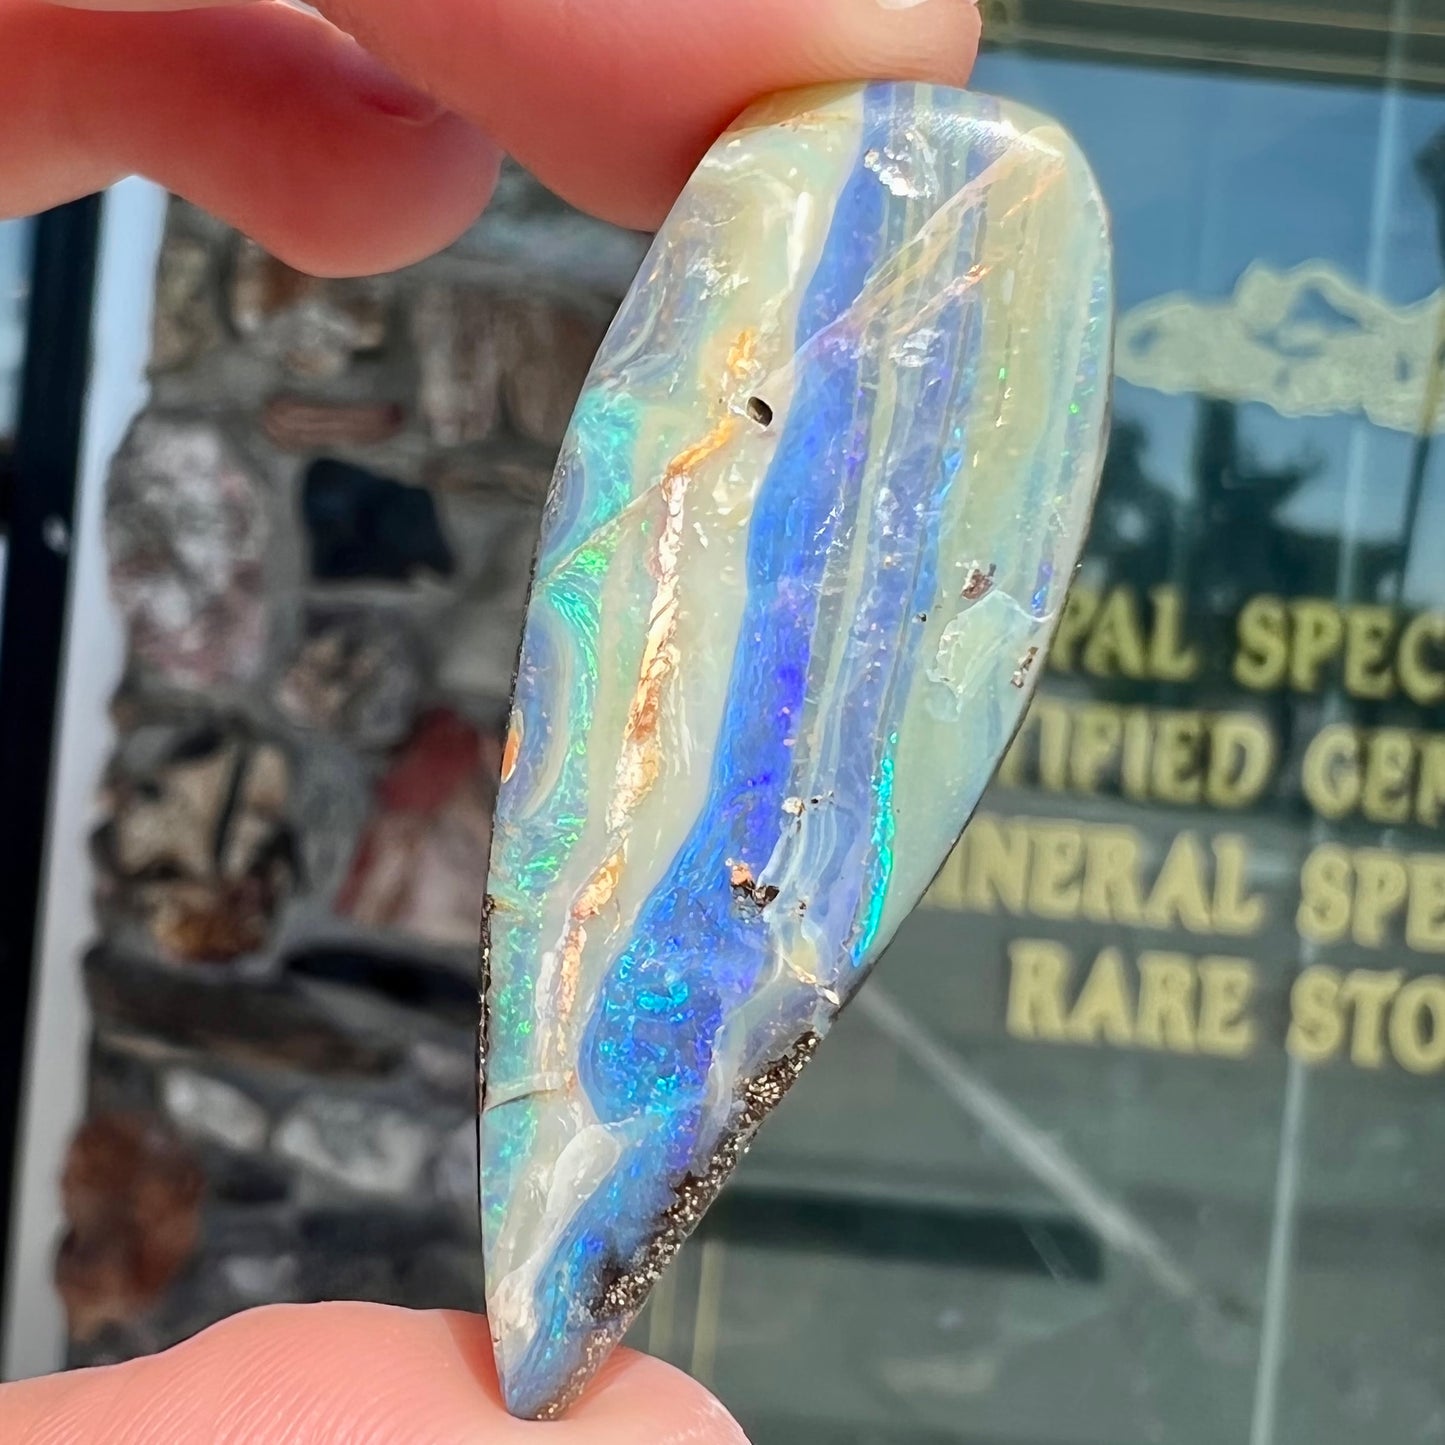 A loose, pear shaped boulder opal stone from Queensland, Australia.